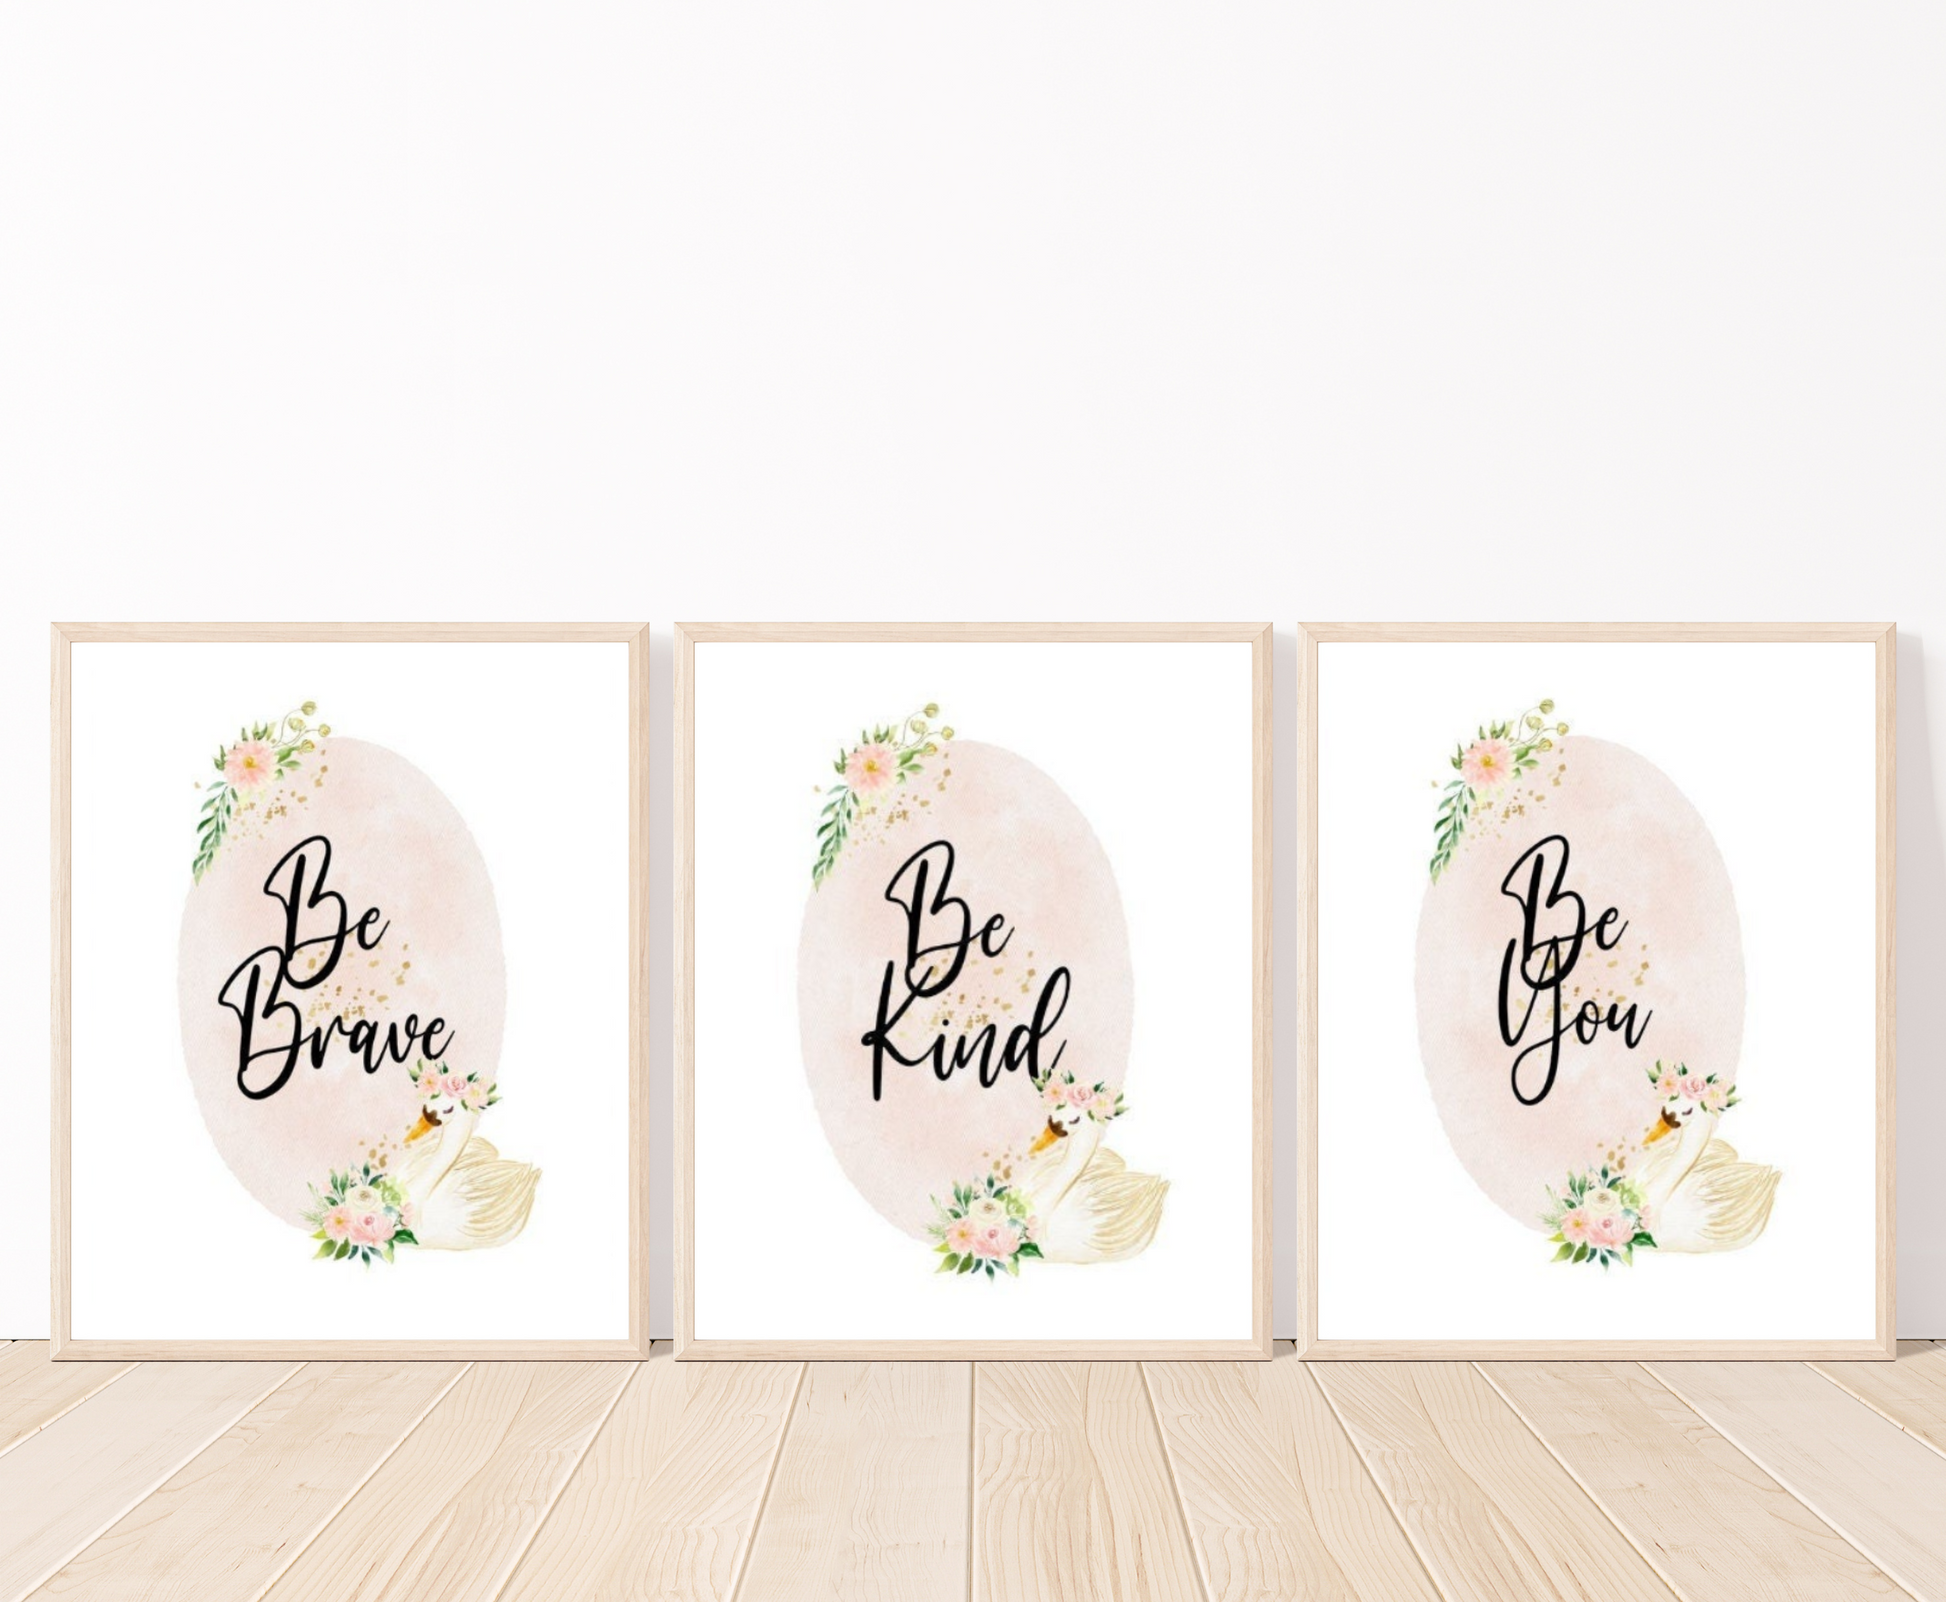 Three identical digital graphics but have different writings showing a baby pink oval shape decorated with flowers on the top and the bottom of the shape and beside the flowers at the bottom there is a cute goose illustration. The first graphic says” Be Brave”, the second “Be Kind”, and the third “Be You”. All these frames are placed on a parquet floor. 